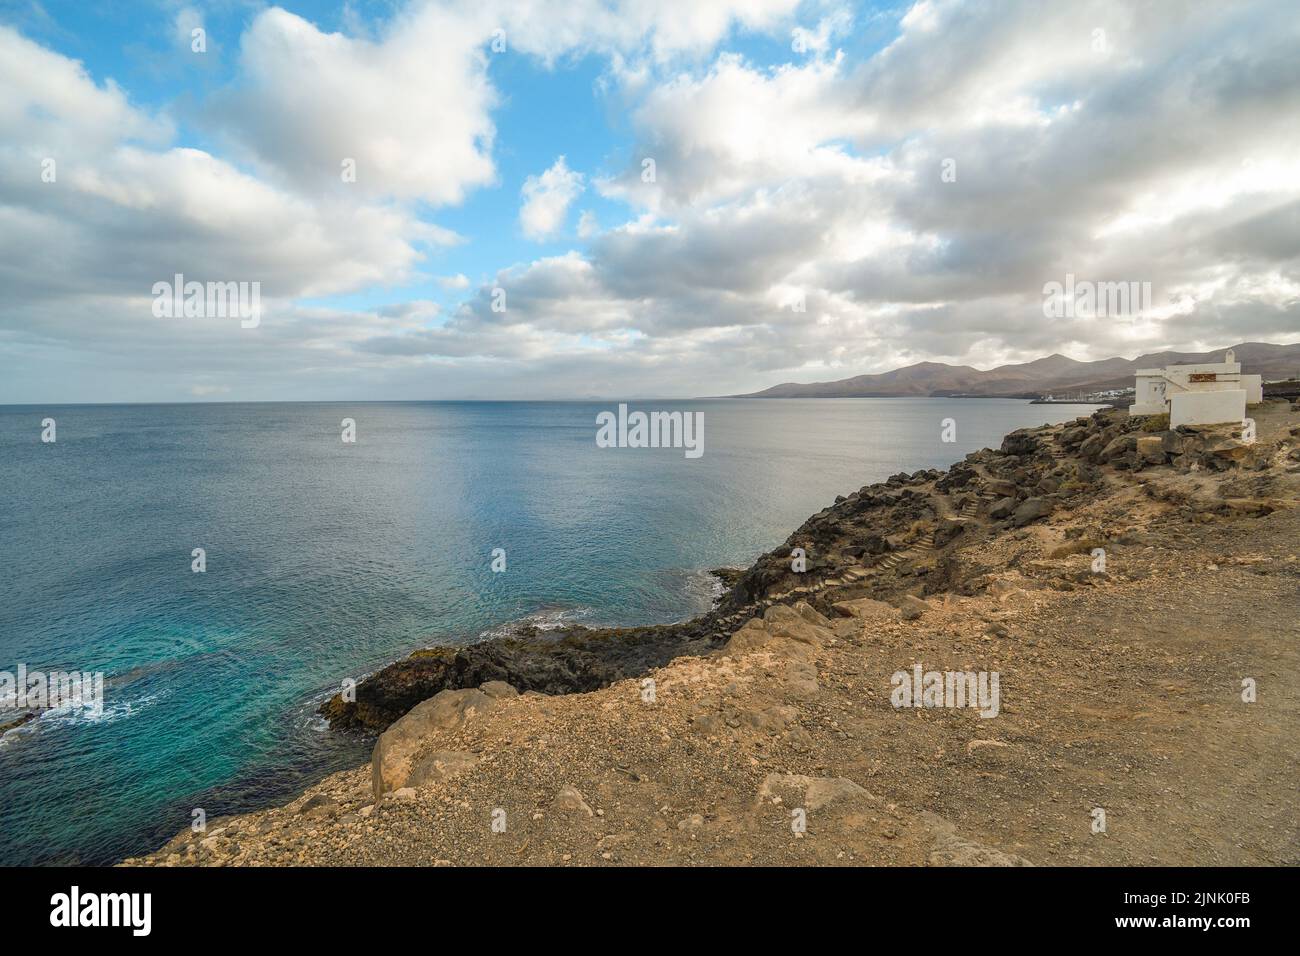 View of the Ajaches from Puerto del Carmen in Lanzarote Stock Photo